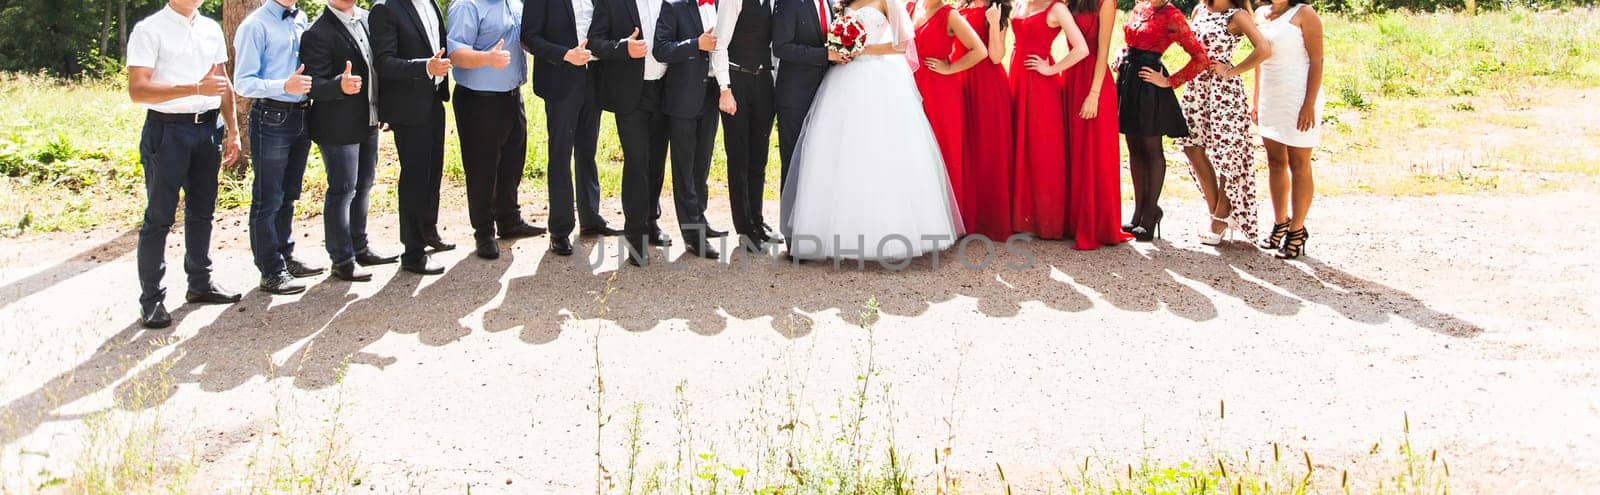 Full length portrait of happy bride and groom standing with guests in garden